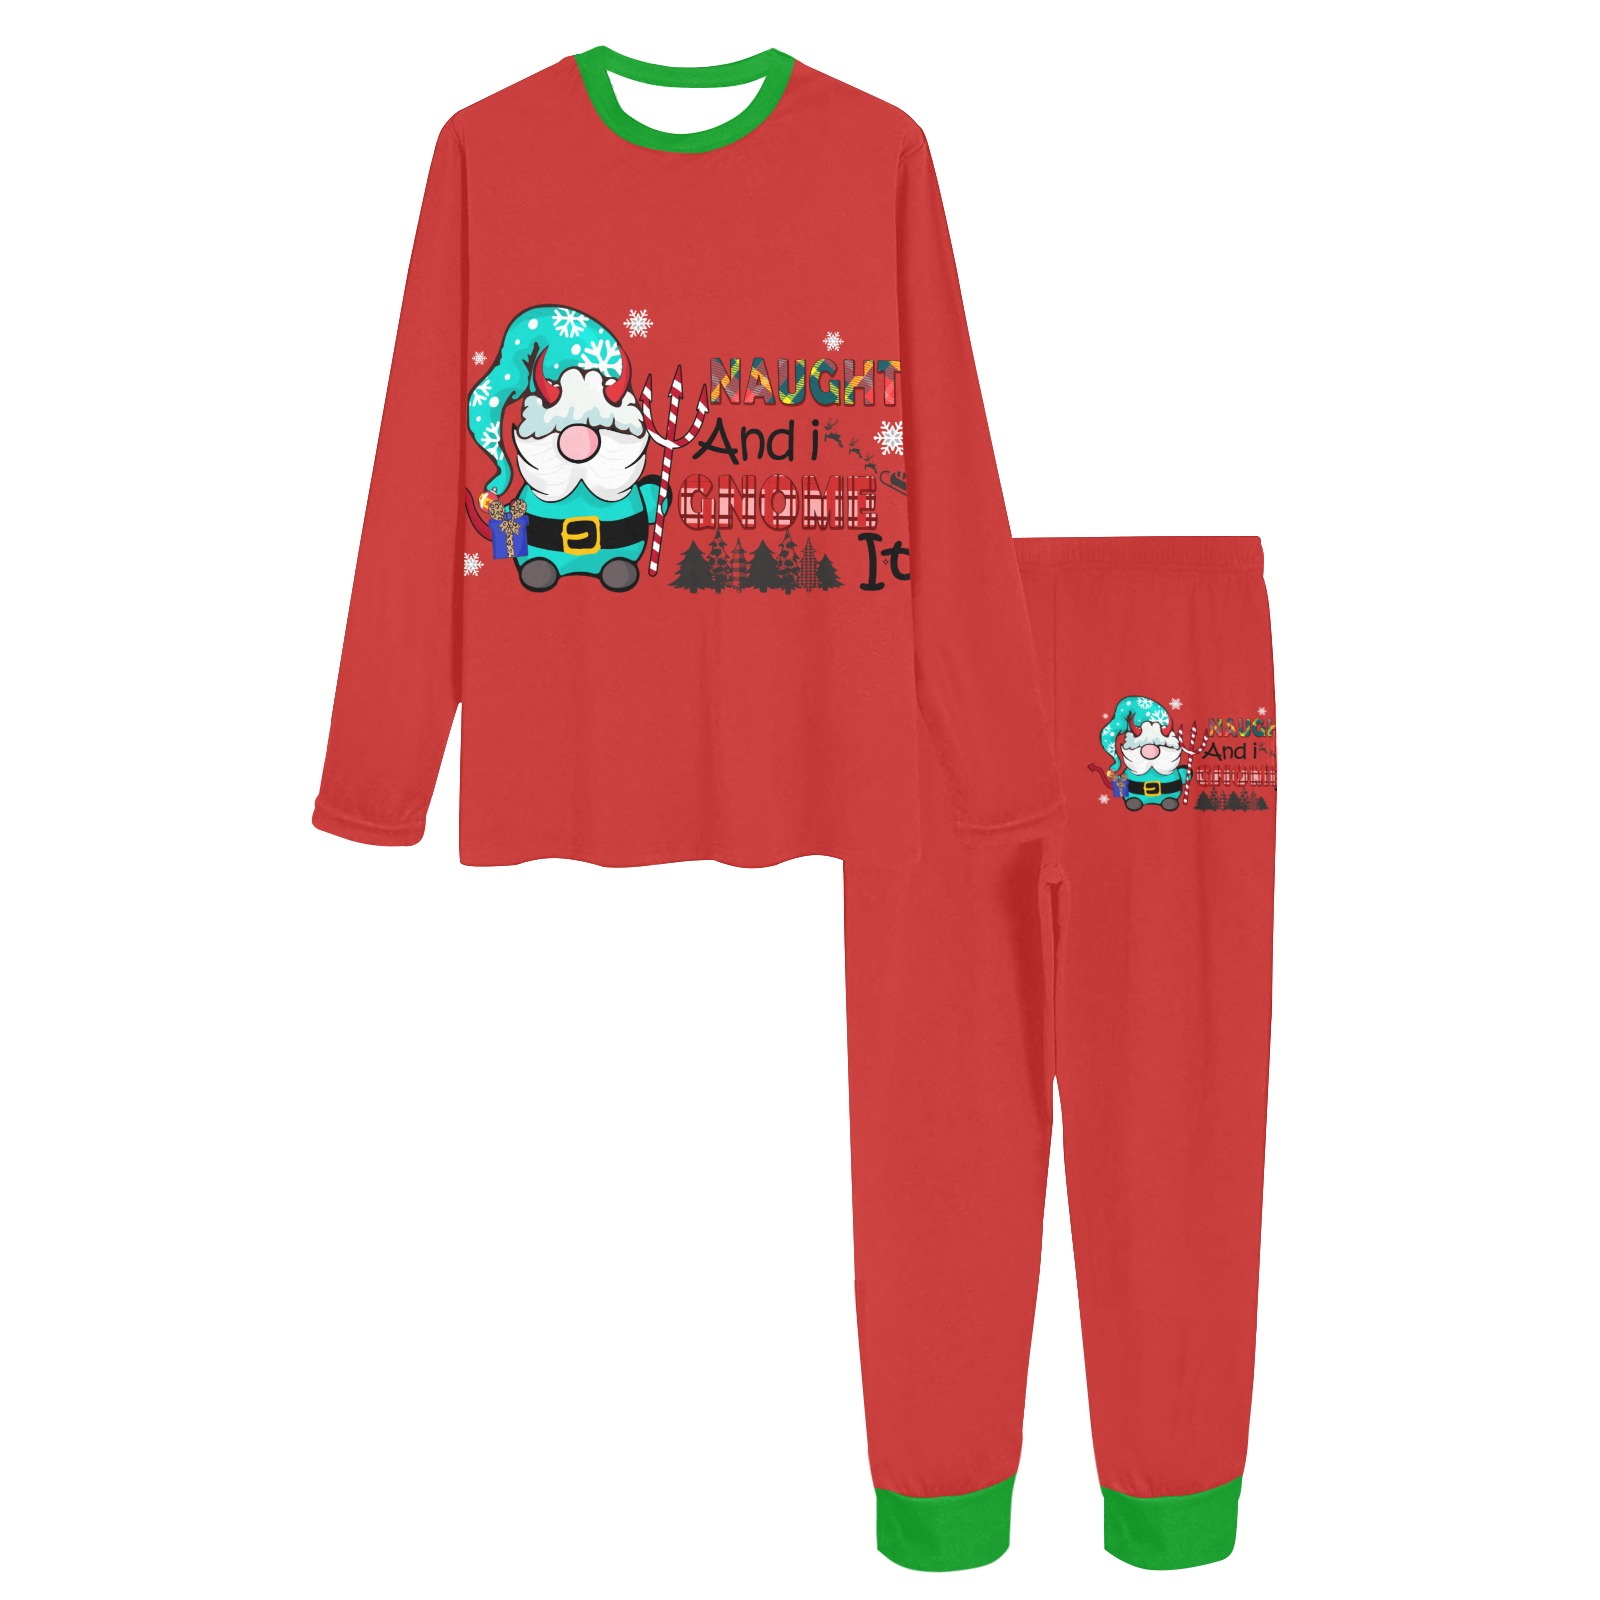 Naughty And I Gnome It (R) Women's All Over Print Pajama Set